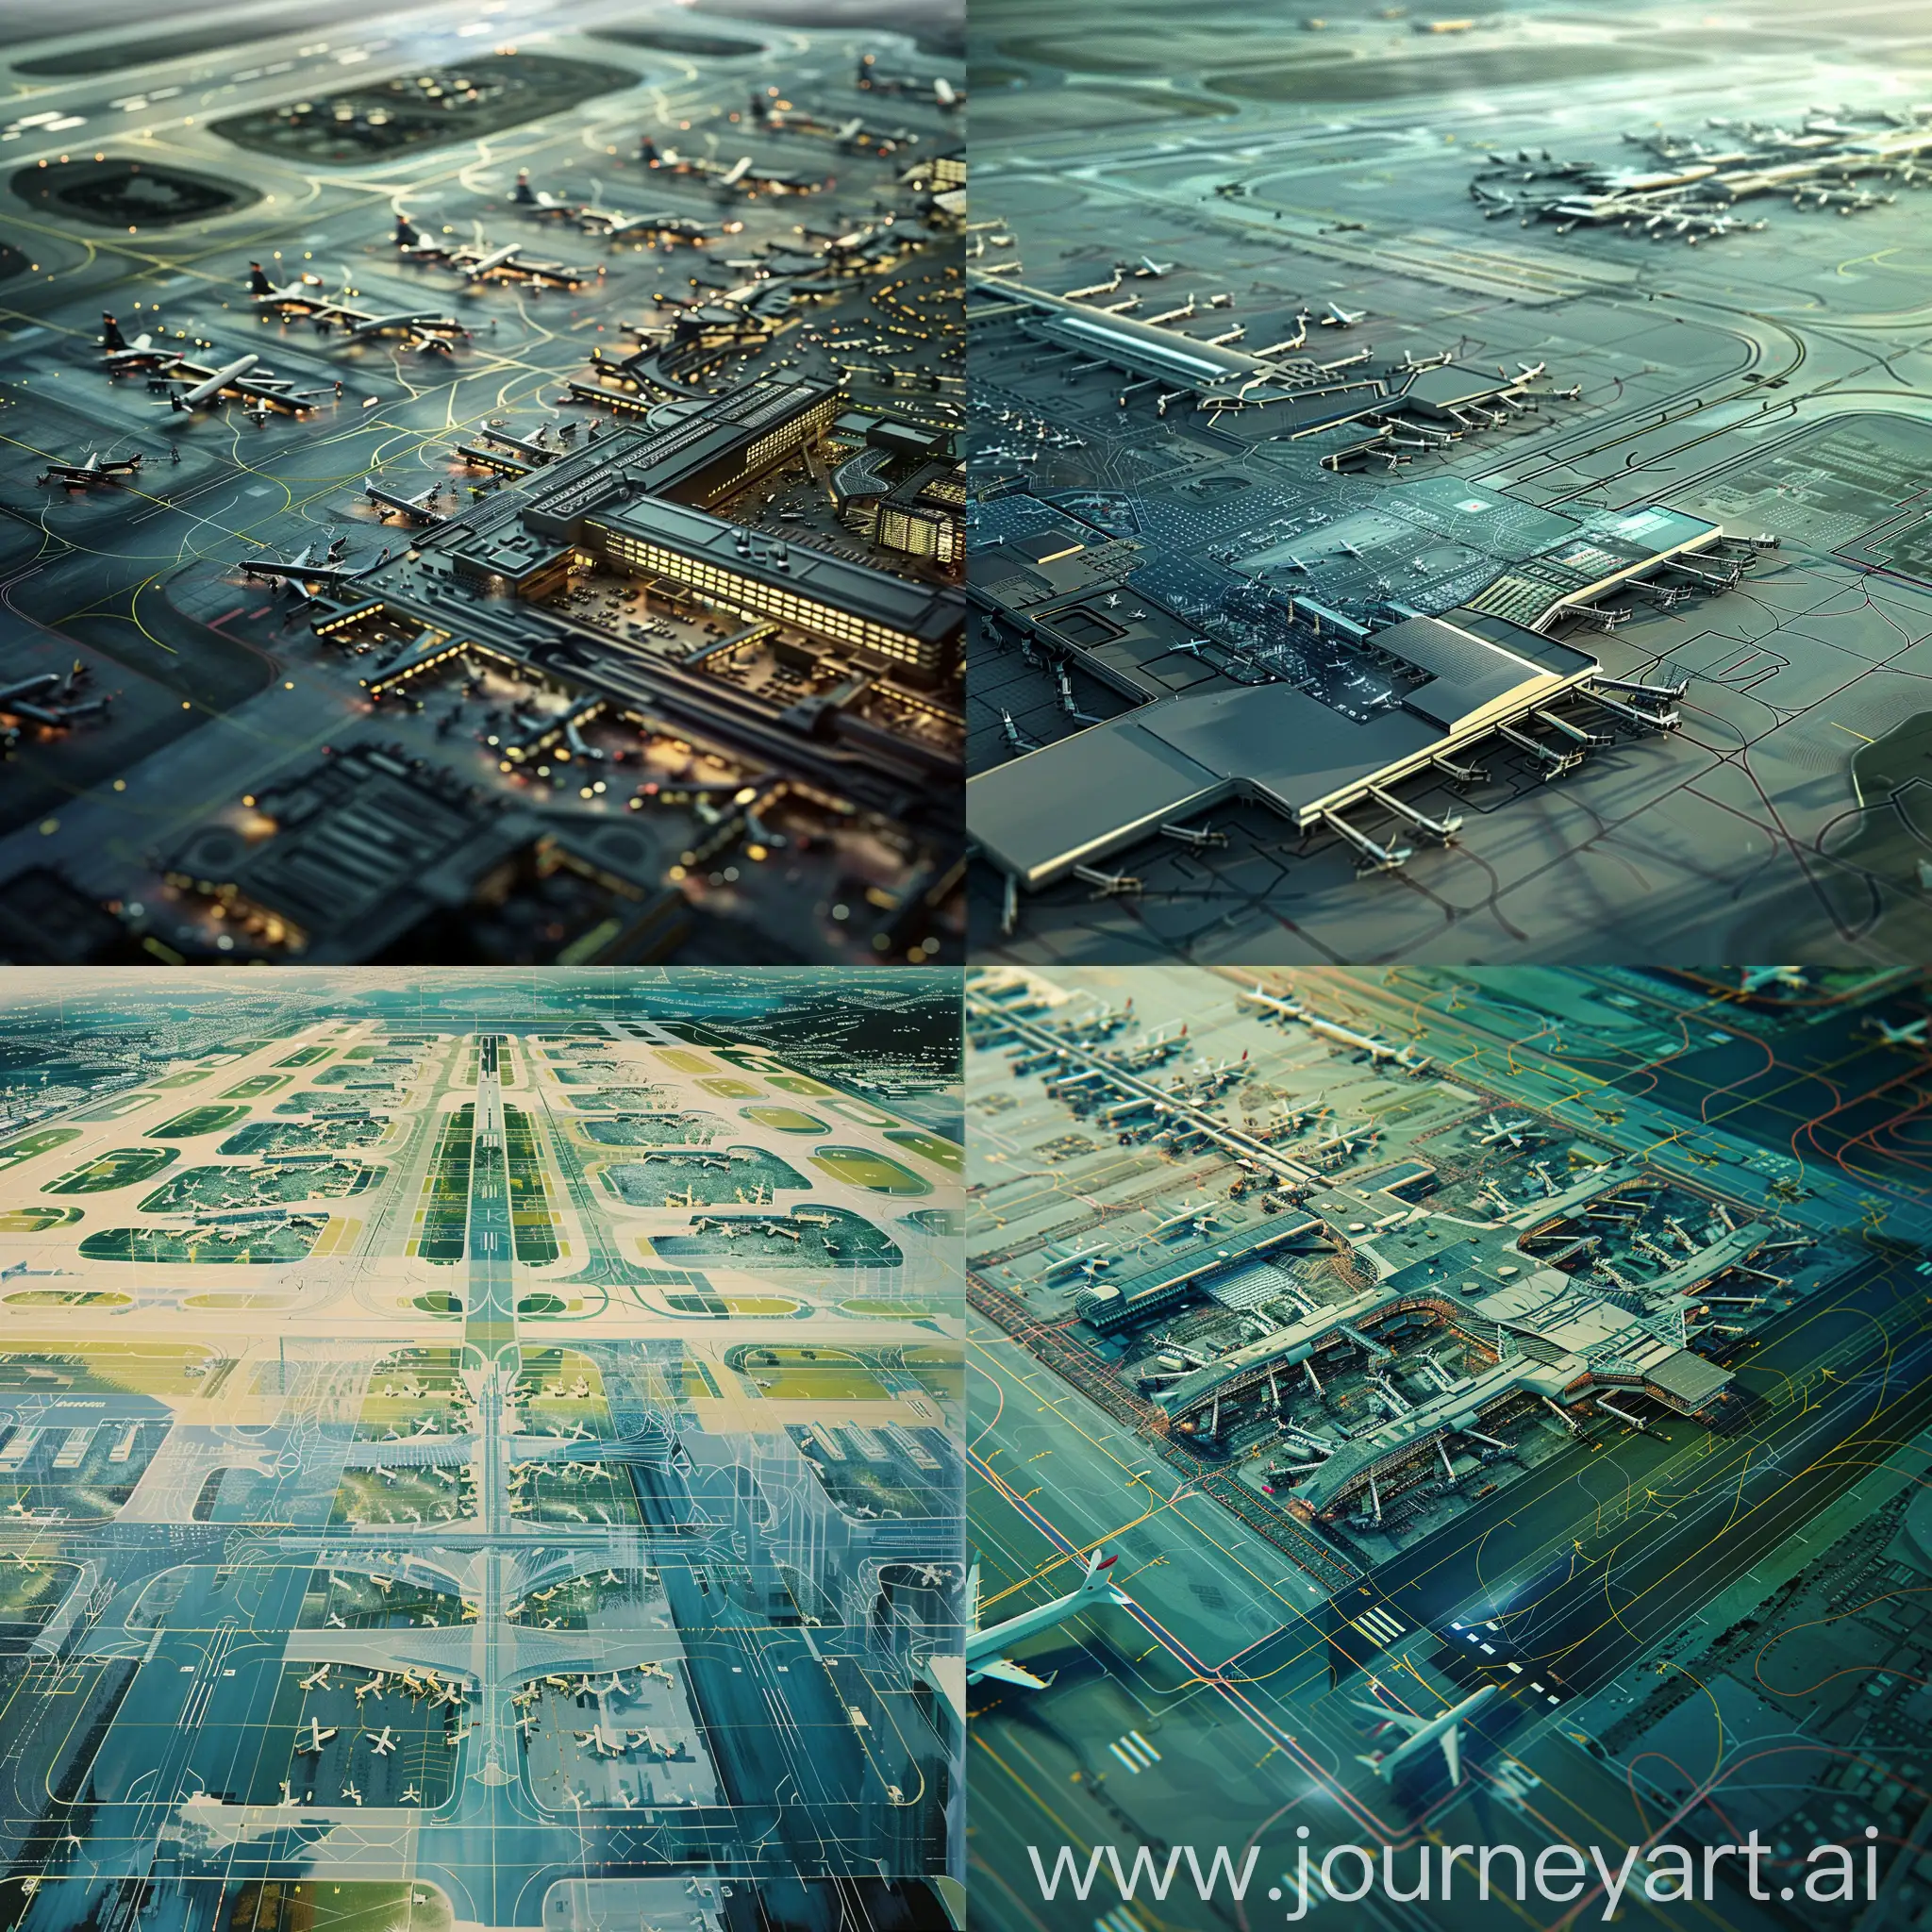 magine a contemporary airport, seen from a bird's eye view, with its intricate network of runways and terminals, all brought to life in vivid detail